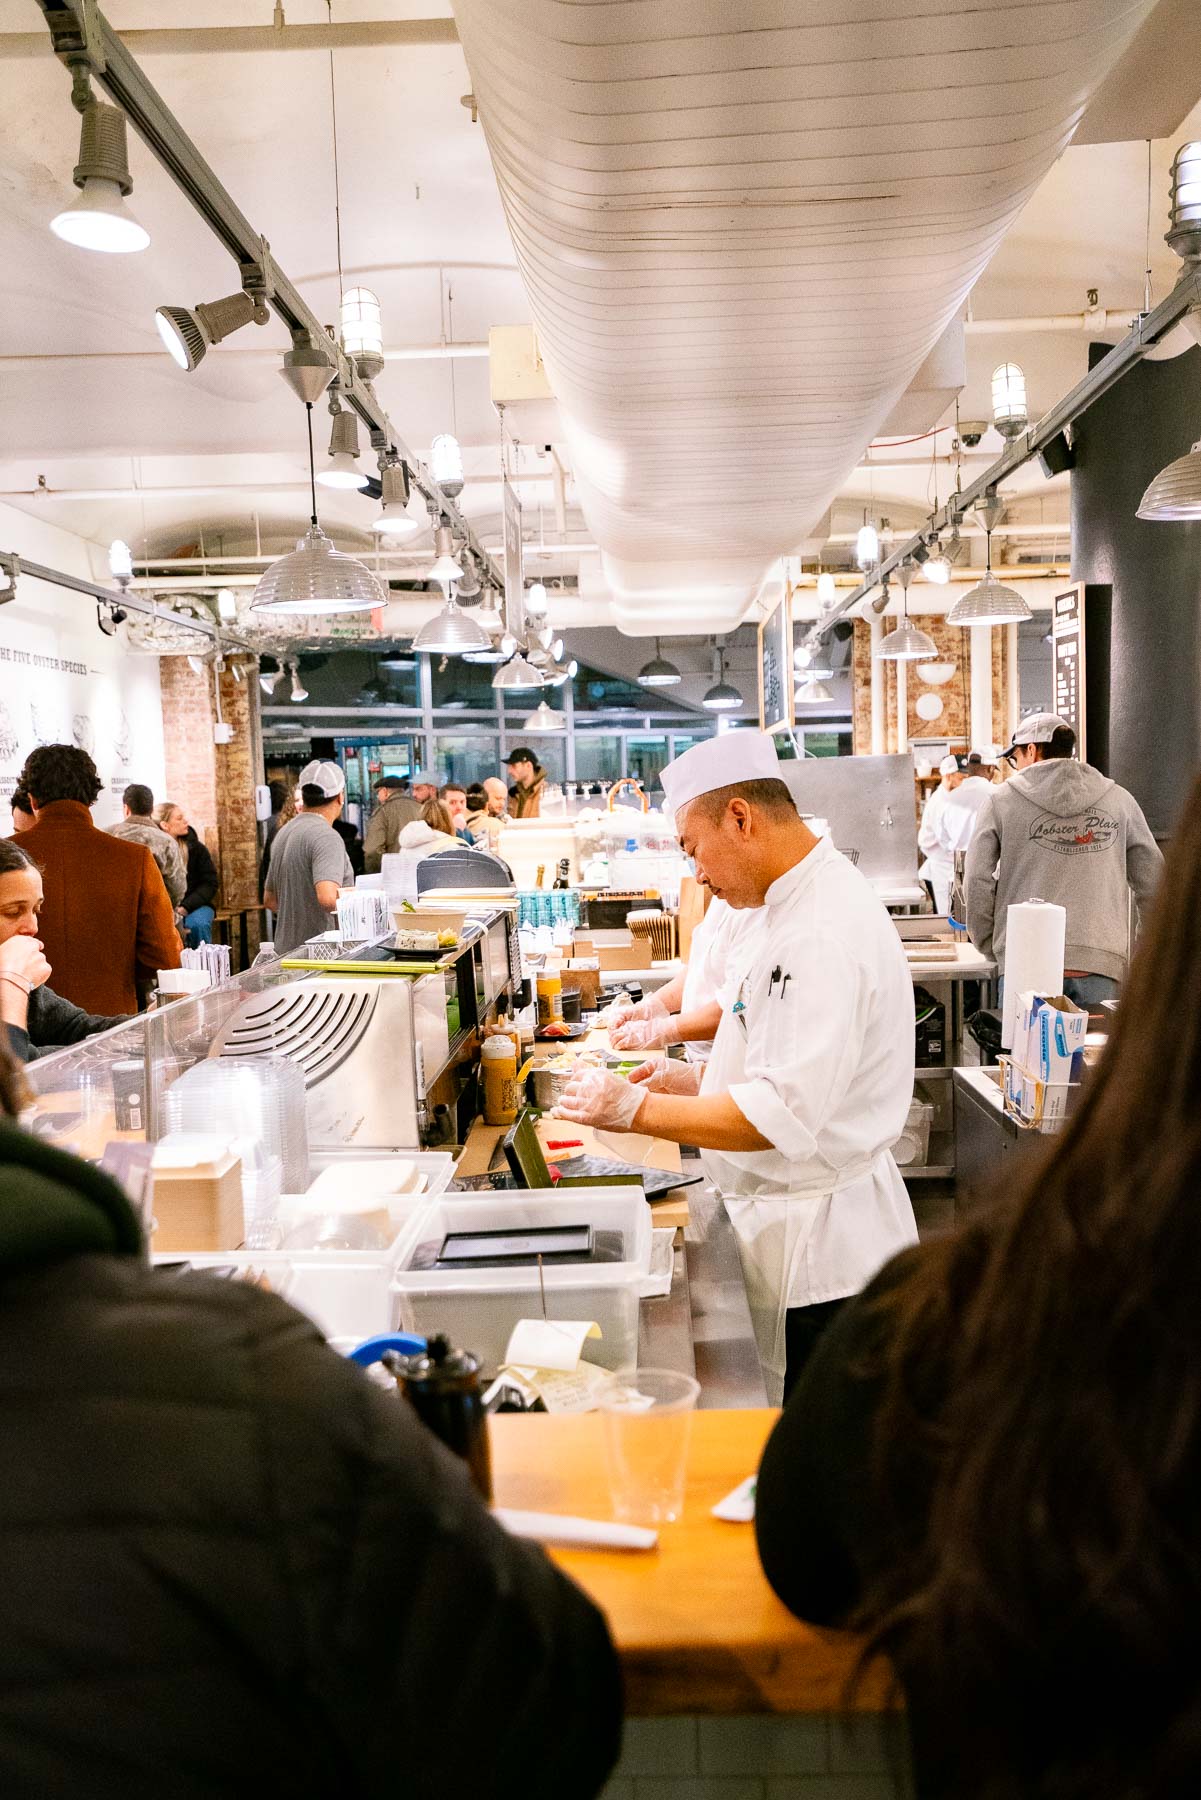 Visiting the Chelsea Market Guide: Tips & The Best Things to Do!